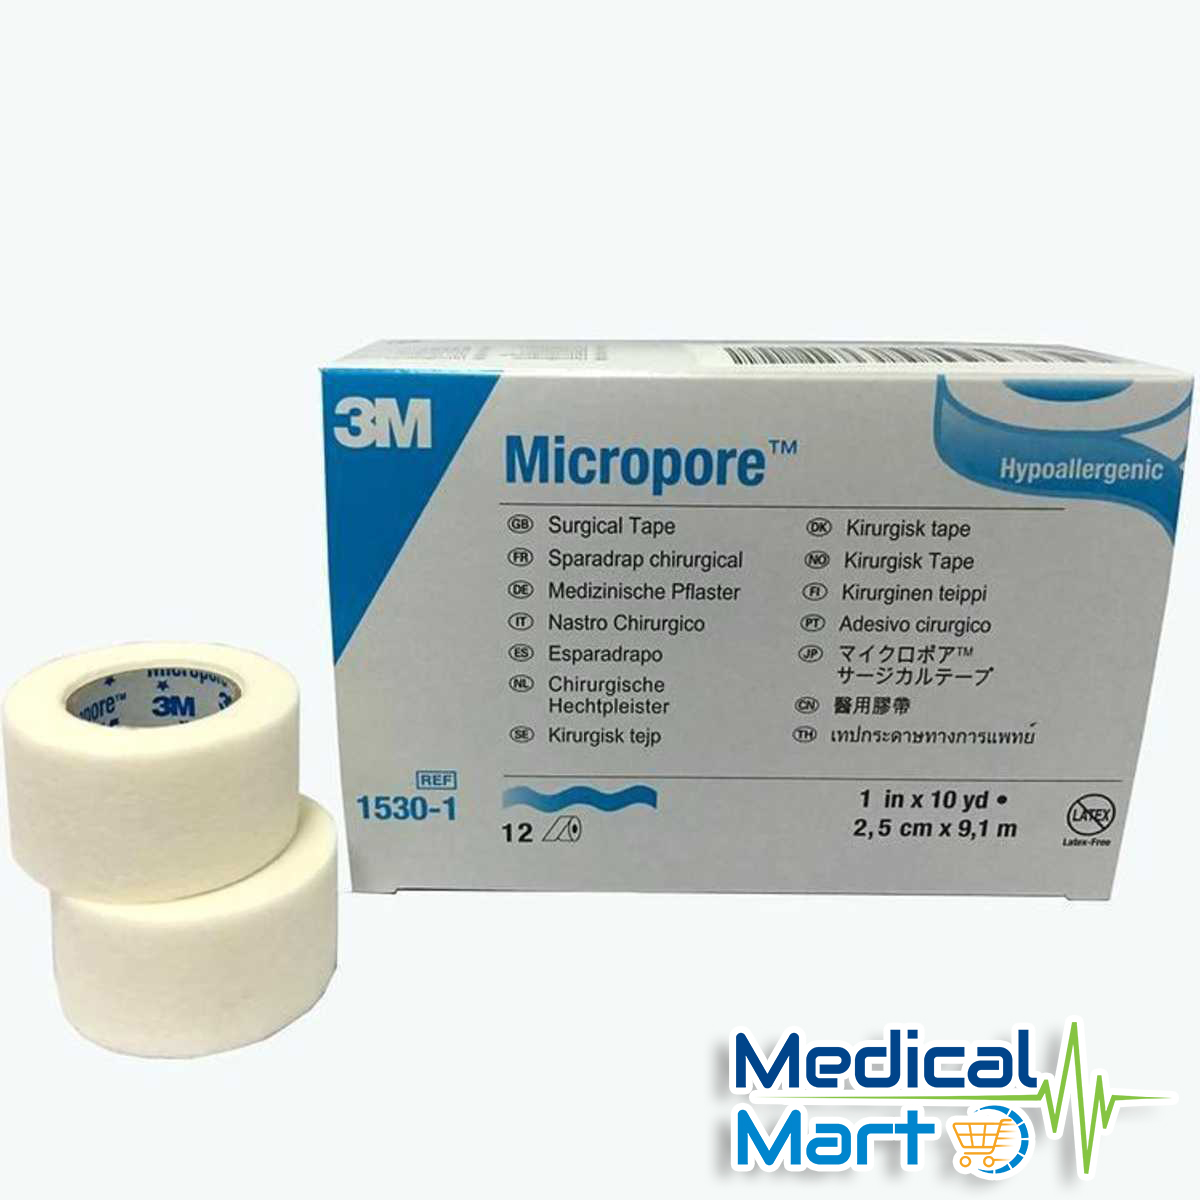 3m Micropore Paper Surgical Tape: 2.5cm x 9.14m (1in x 10yds)